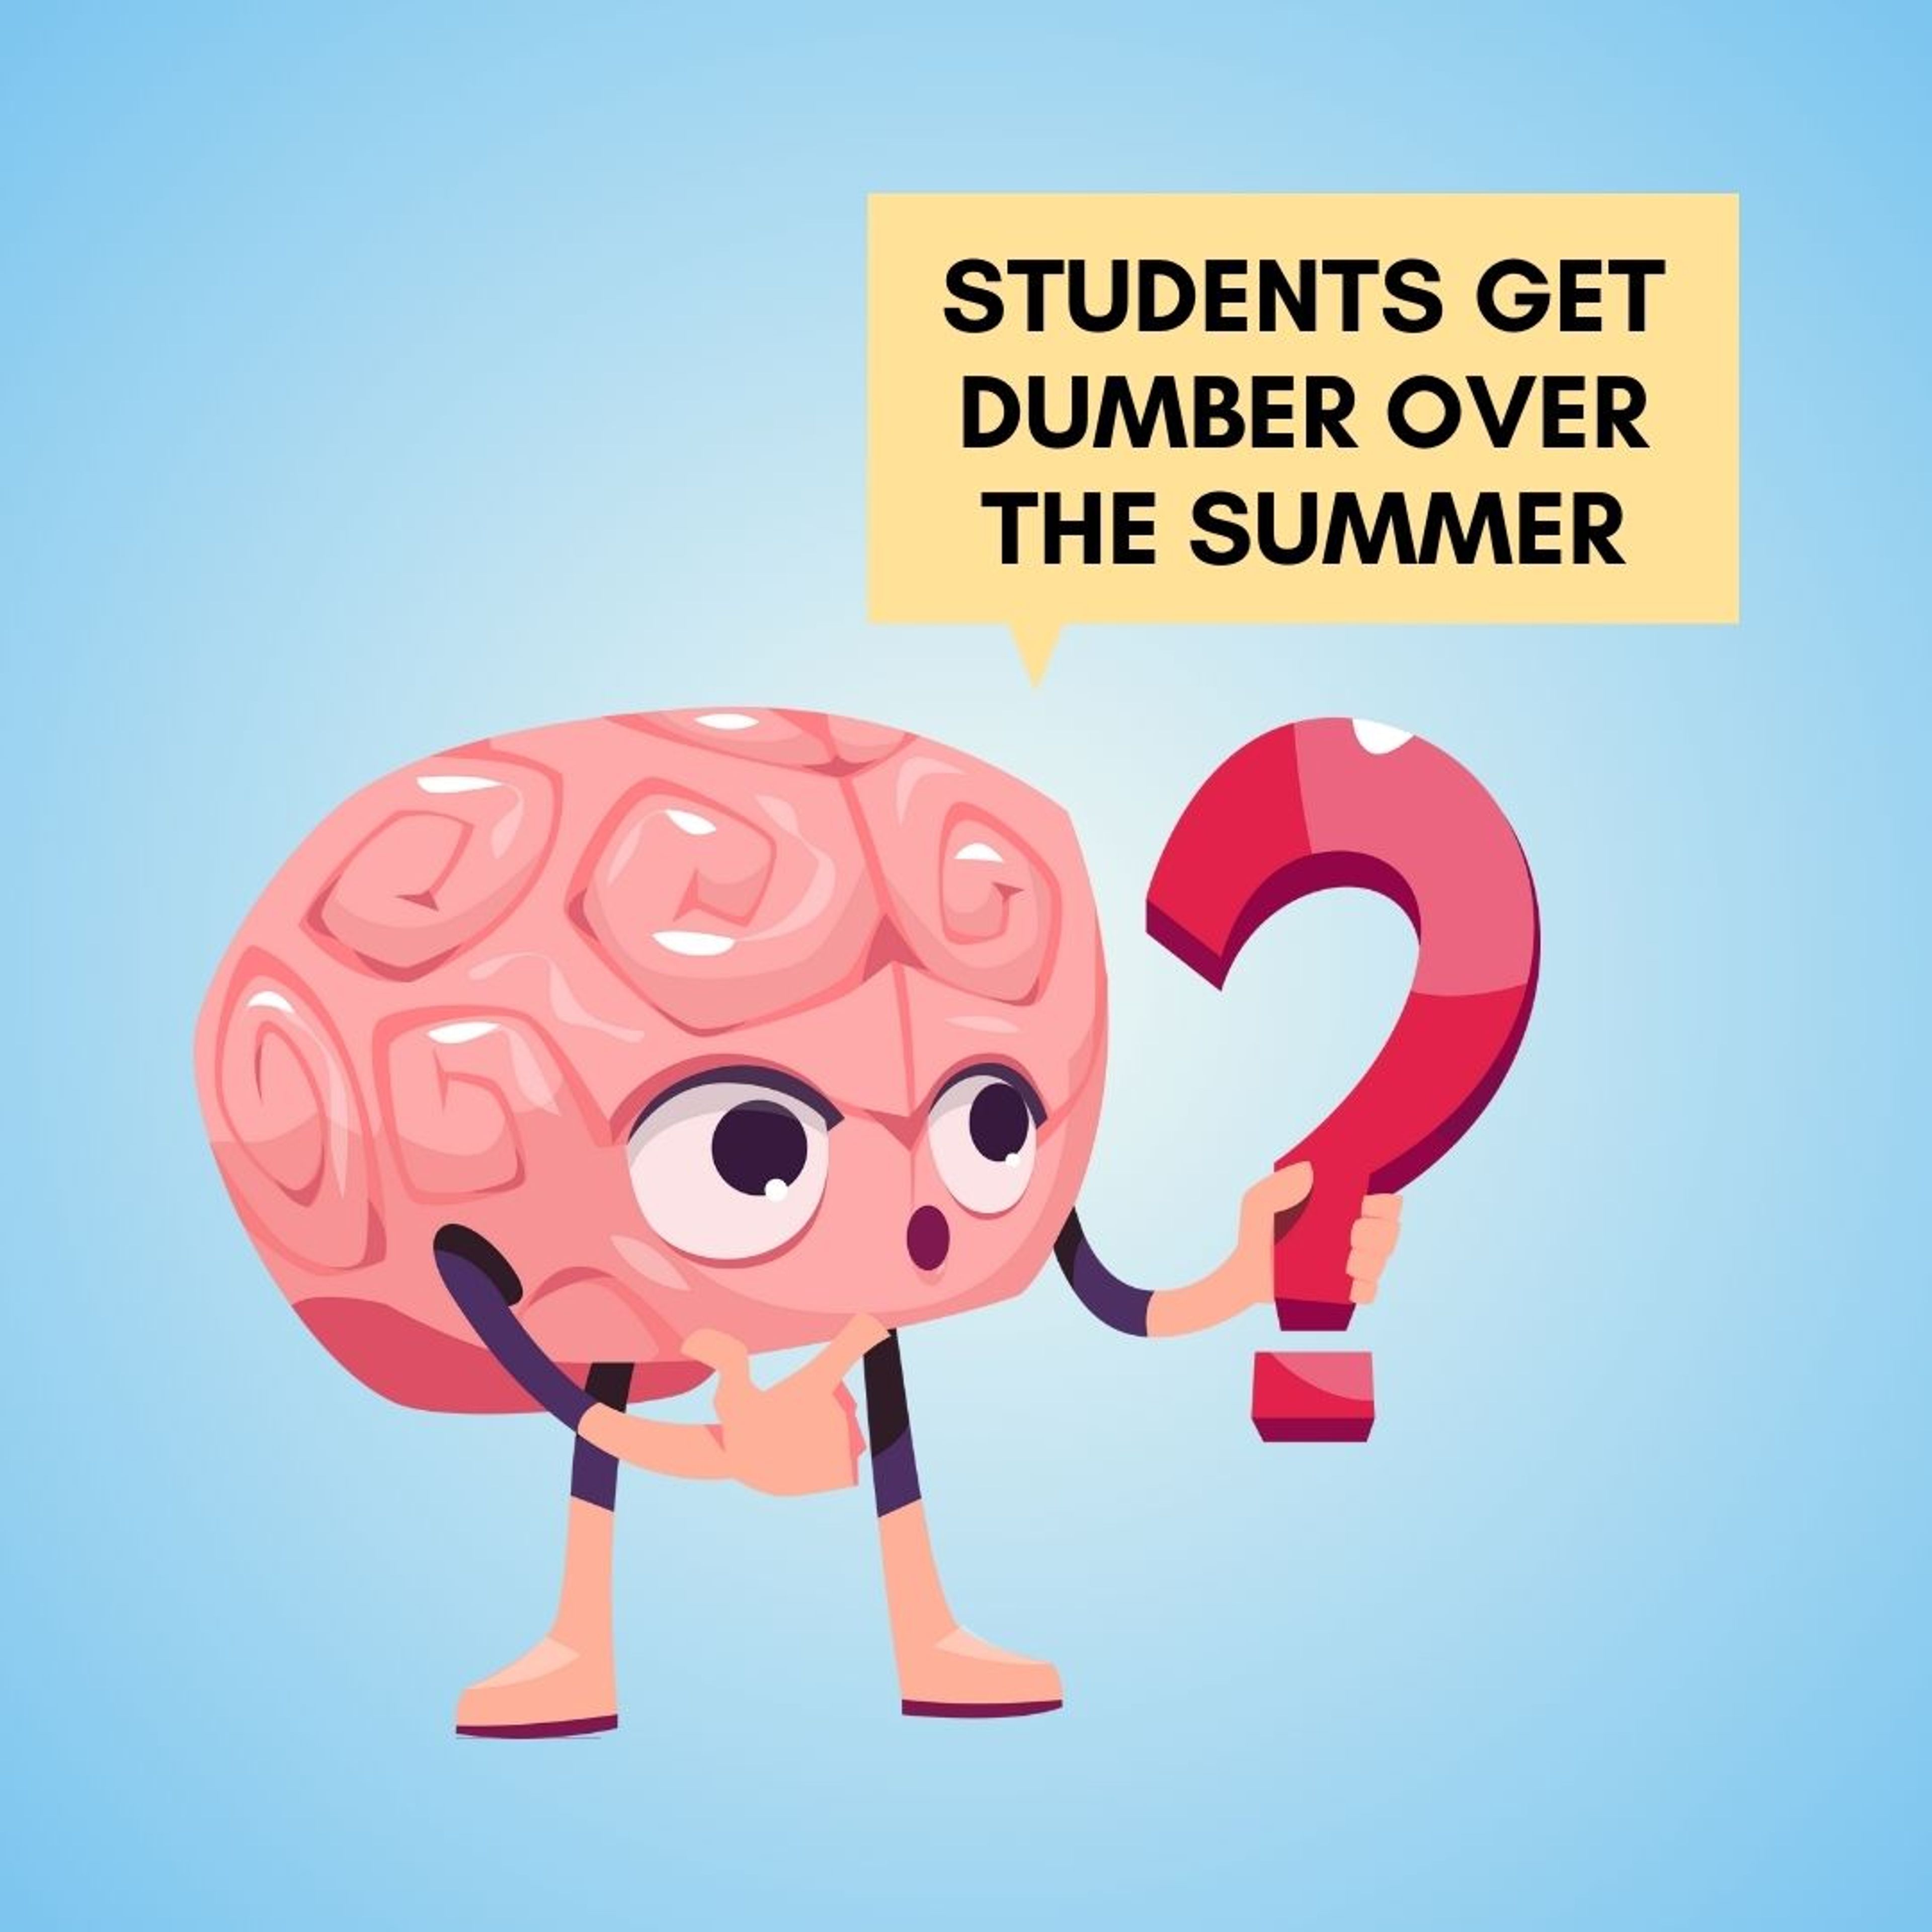 Students fight ‘summer brain’ during the warm season